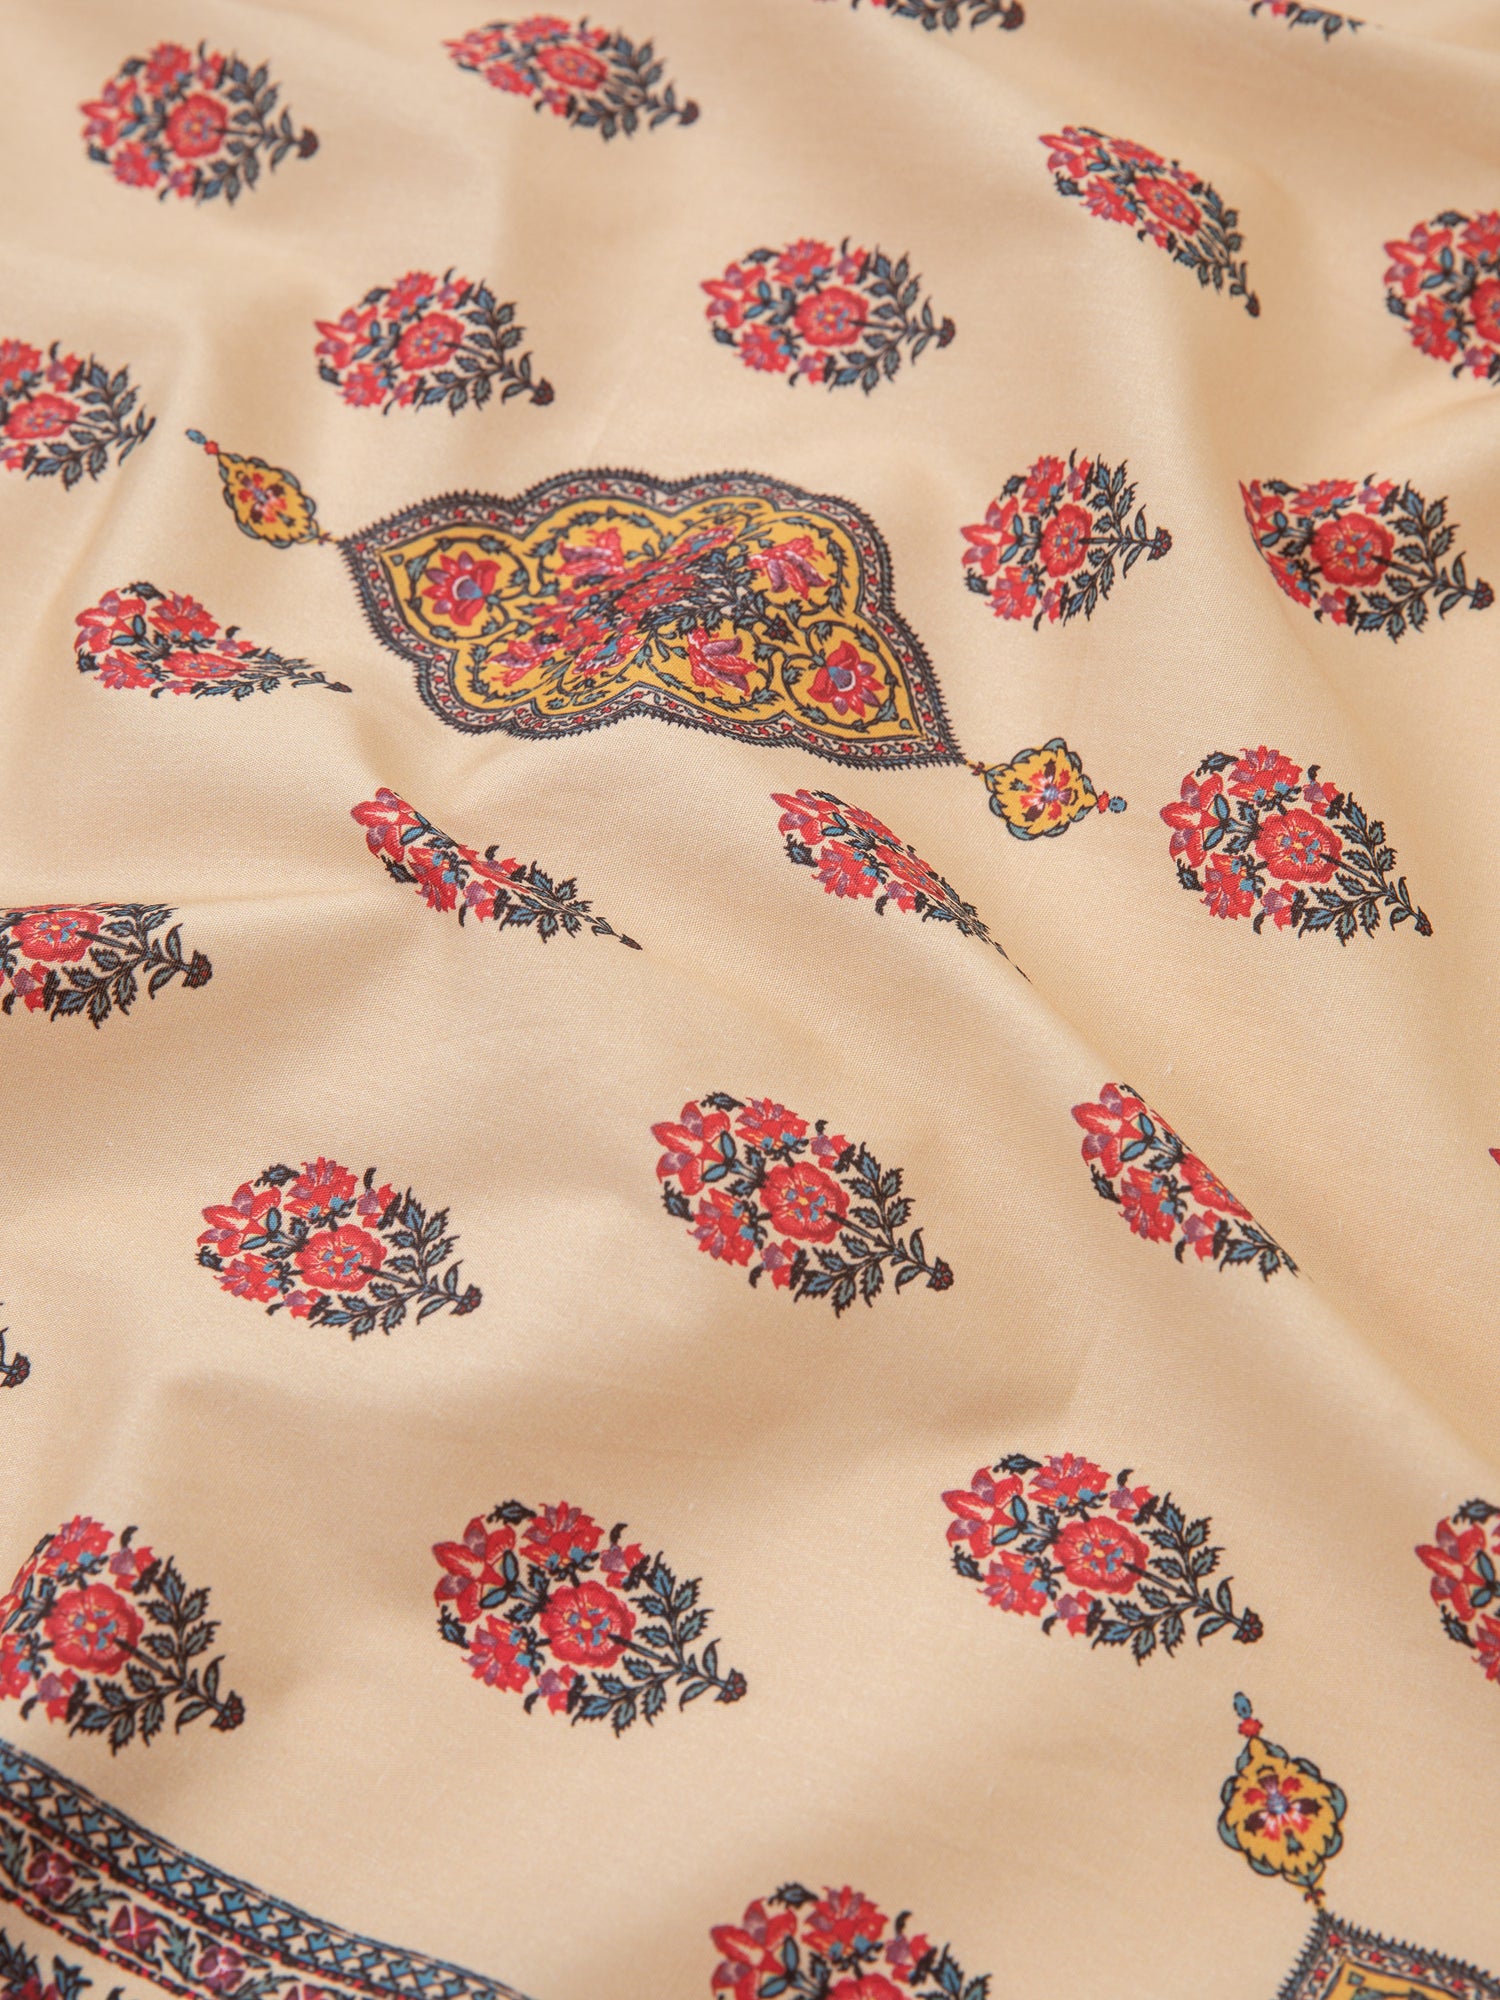 An airy Poinciana Bandana cotton blend fabric with Indo-Aryan prints in beige and red, from the brand Found.